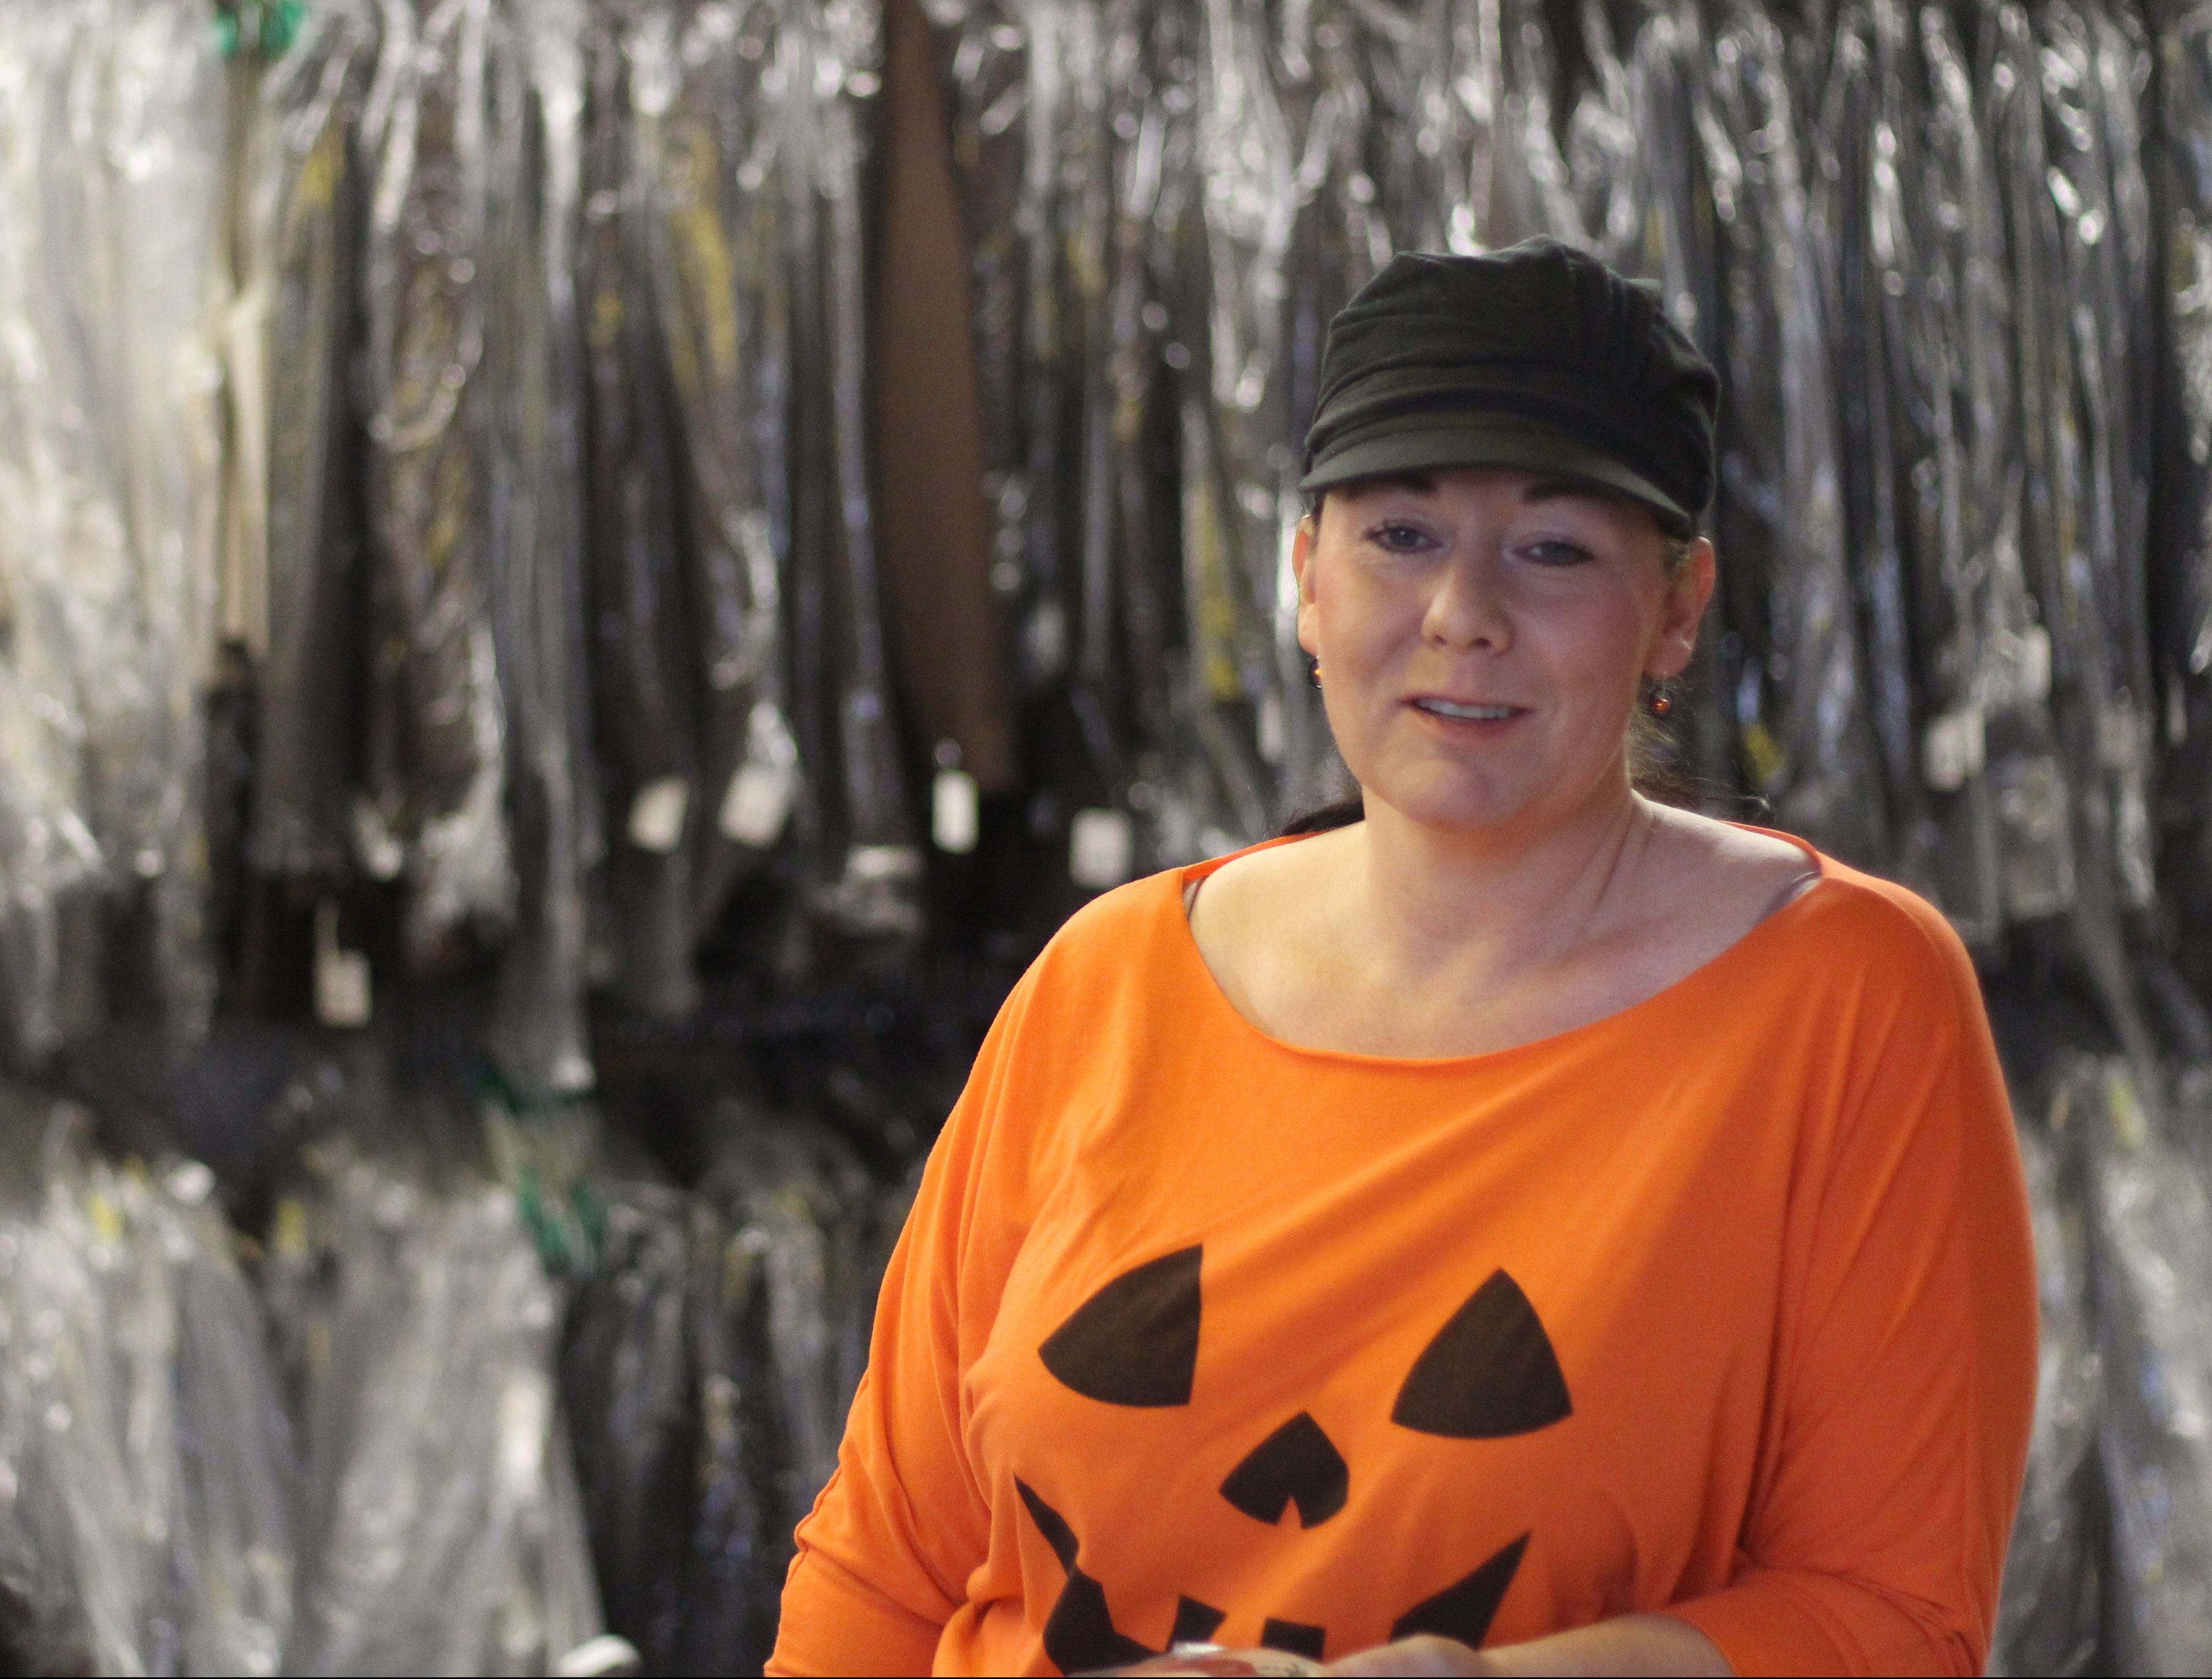 Starla Heim, the owner of Dooleys Tuxedos and Costumes Photo by Wesley Early, Alaska Public Media - Anchorage)